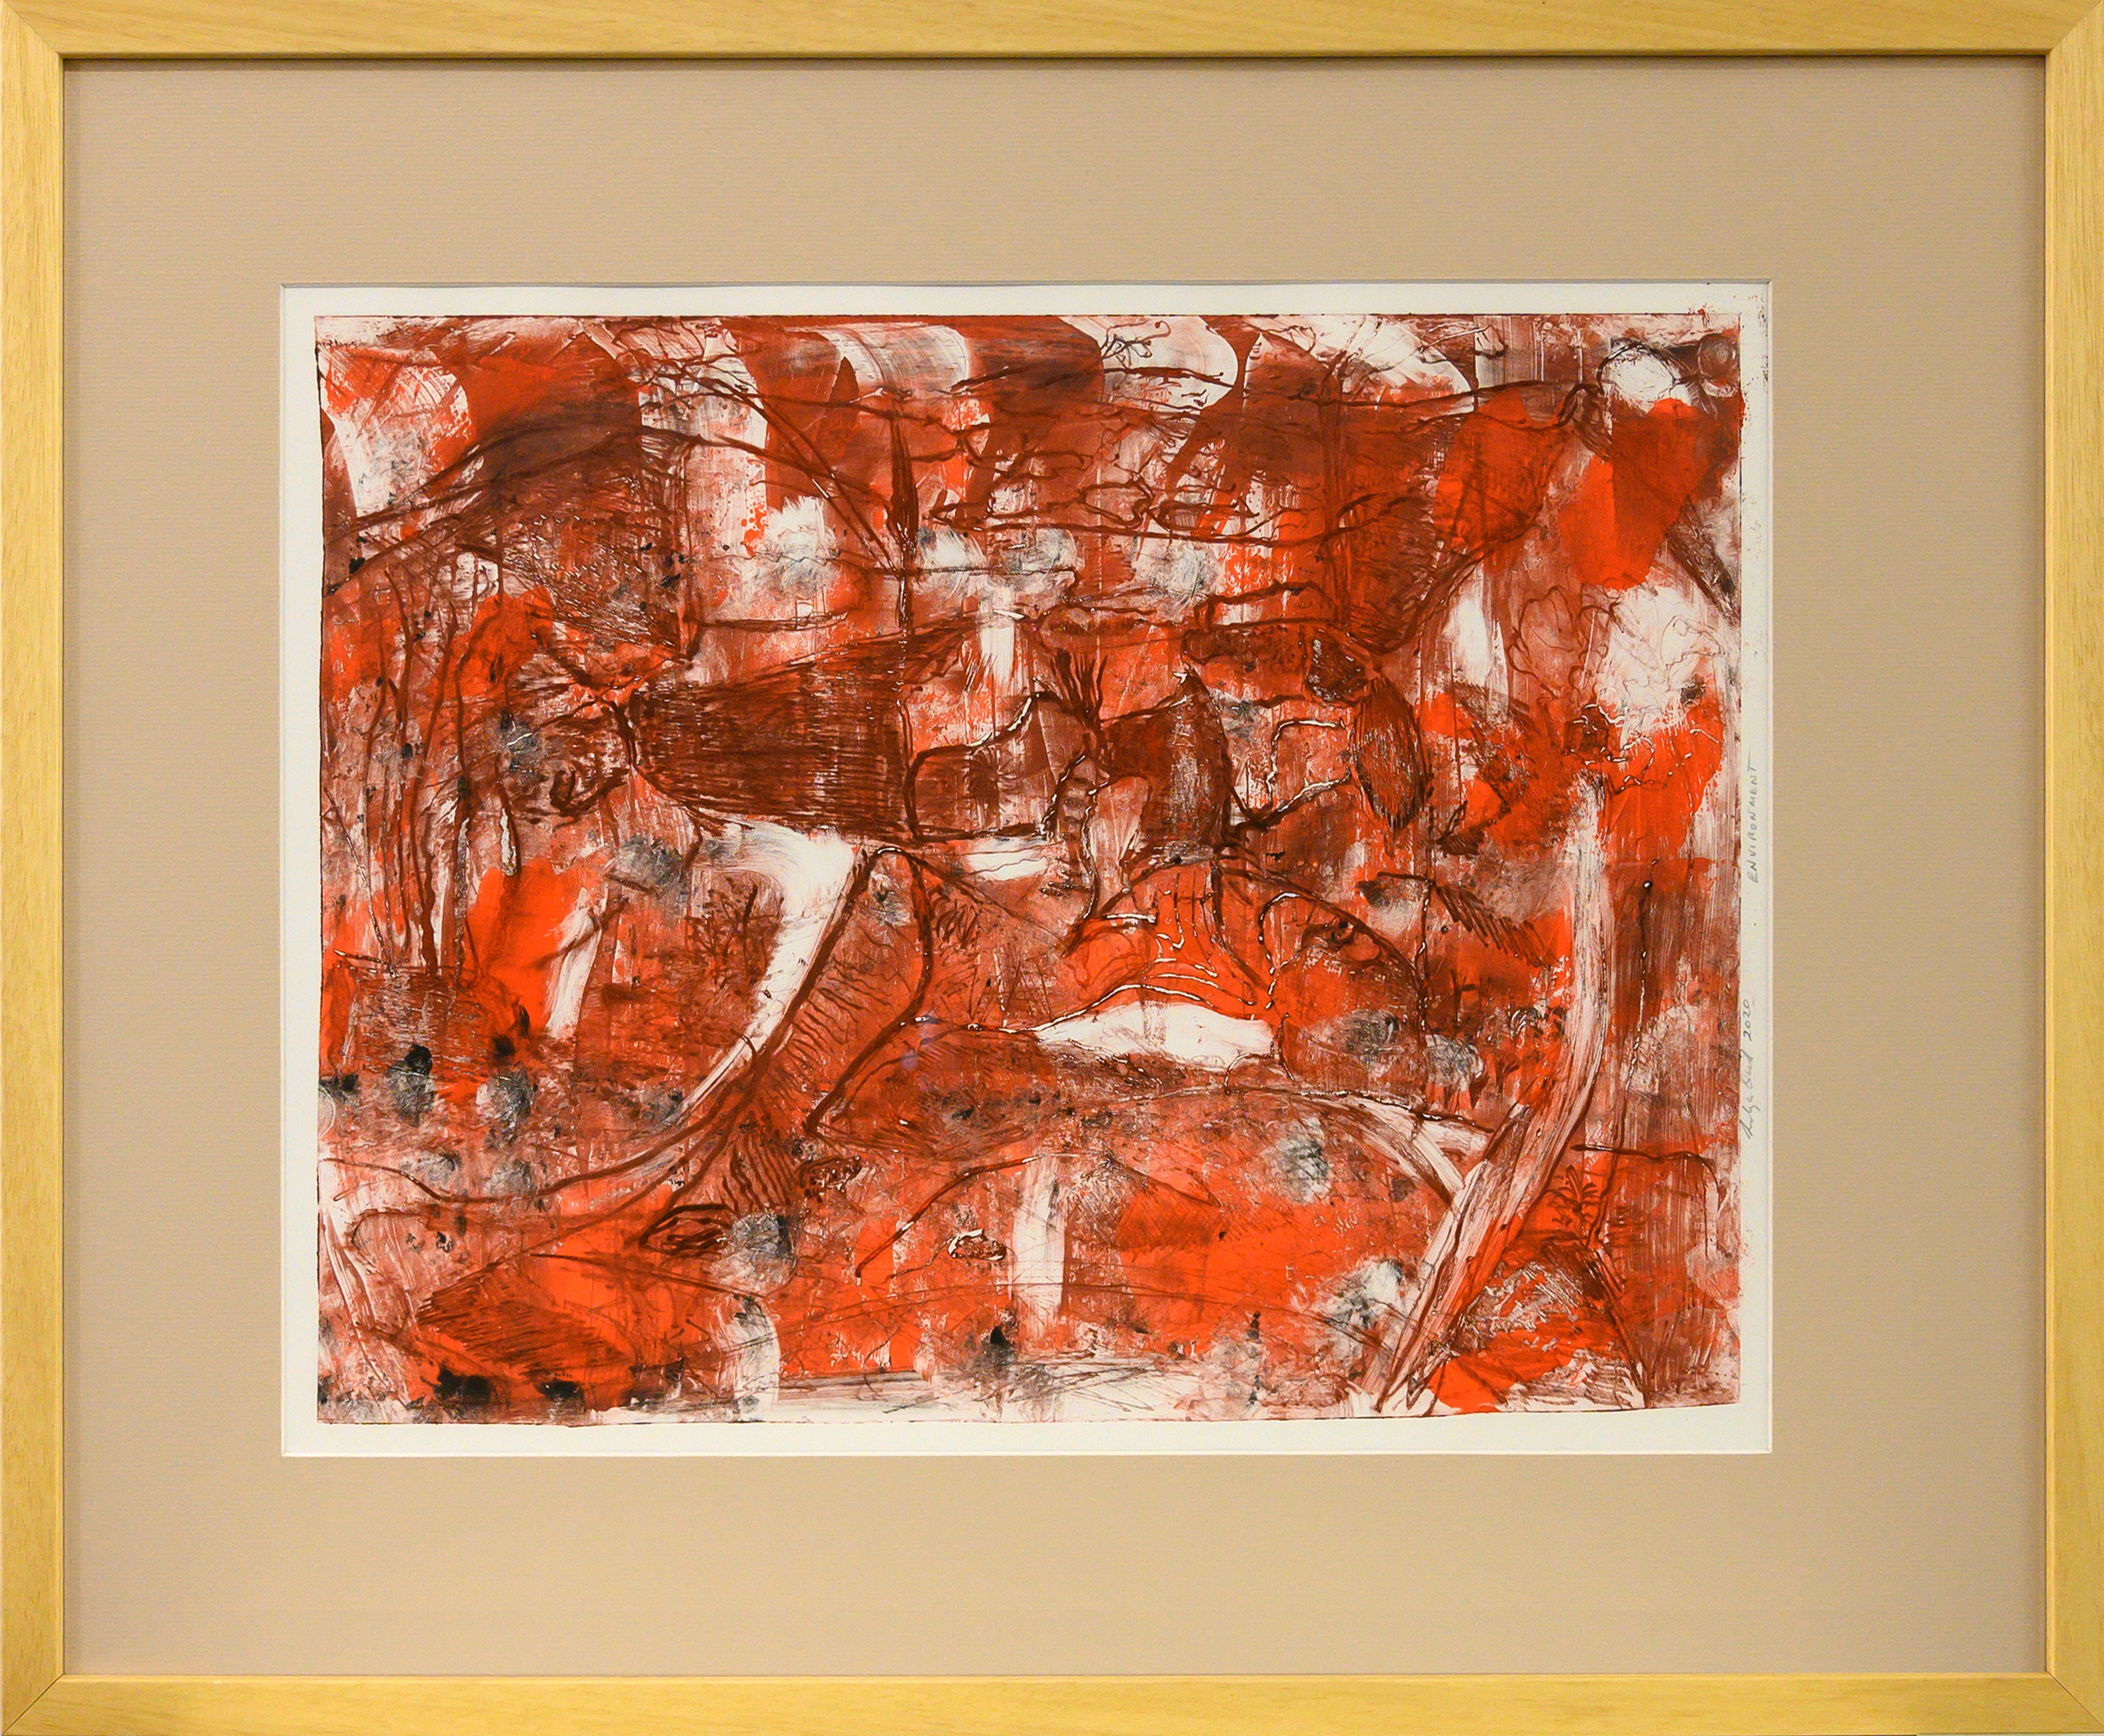 Framed artwork by Lilija Quill of an abstract red landscape